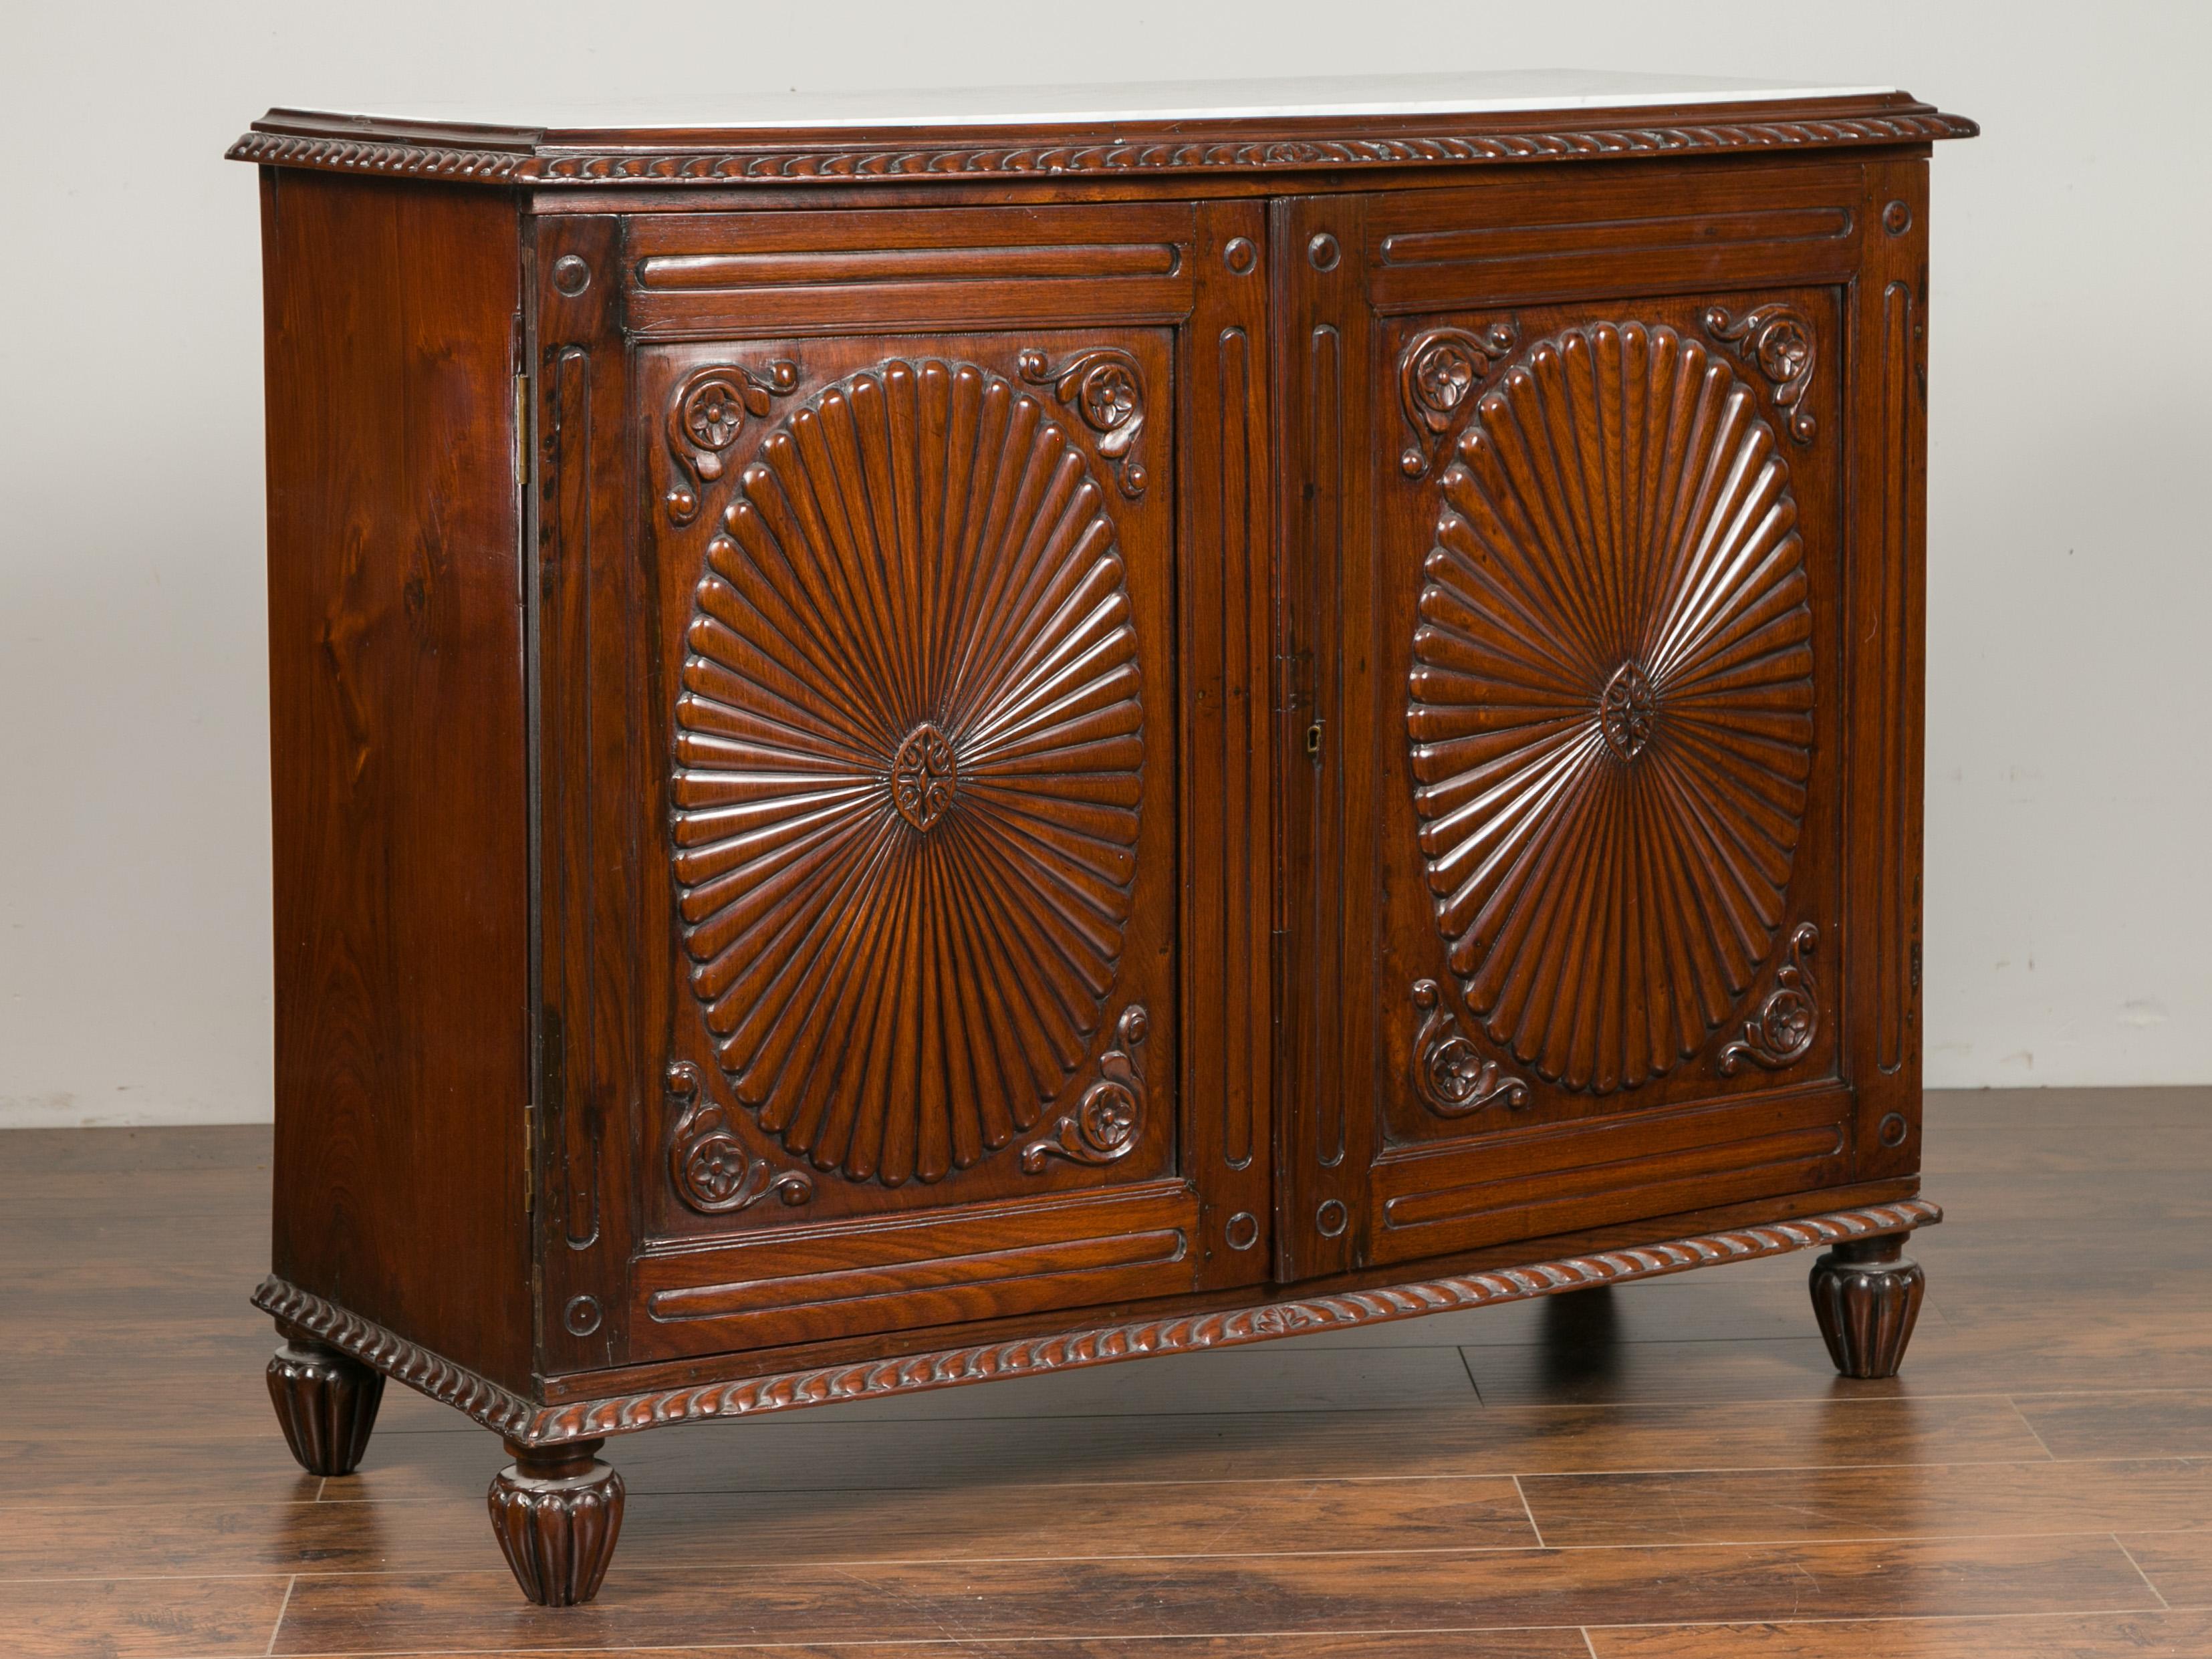 An Anglo-Indian mahogany buffet from the late 19th century, with reeded oval radiating motifs and white veined marble top. Crafted during the last quarter of the 19th century, this mahogany buffet features a white veined inset marble top, resting